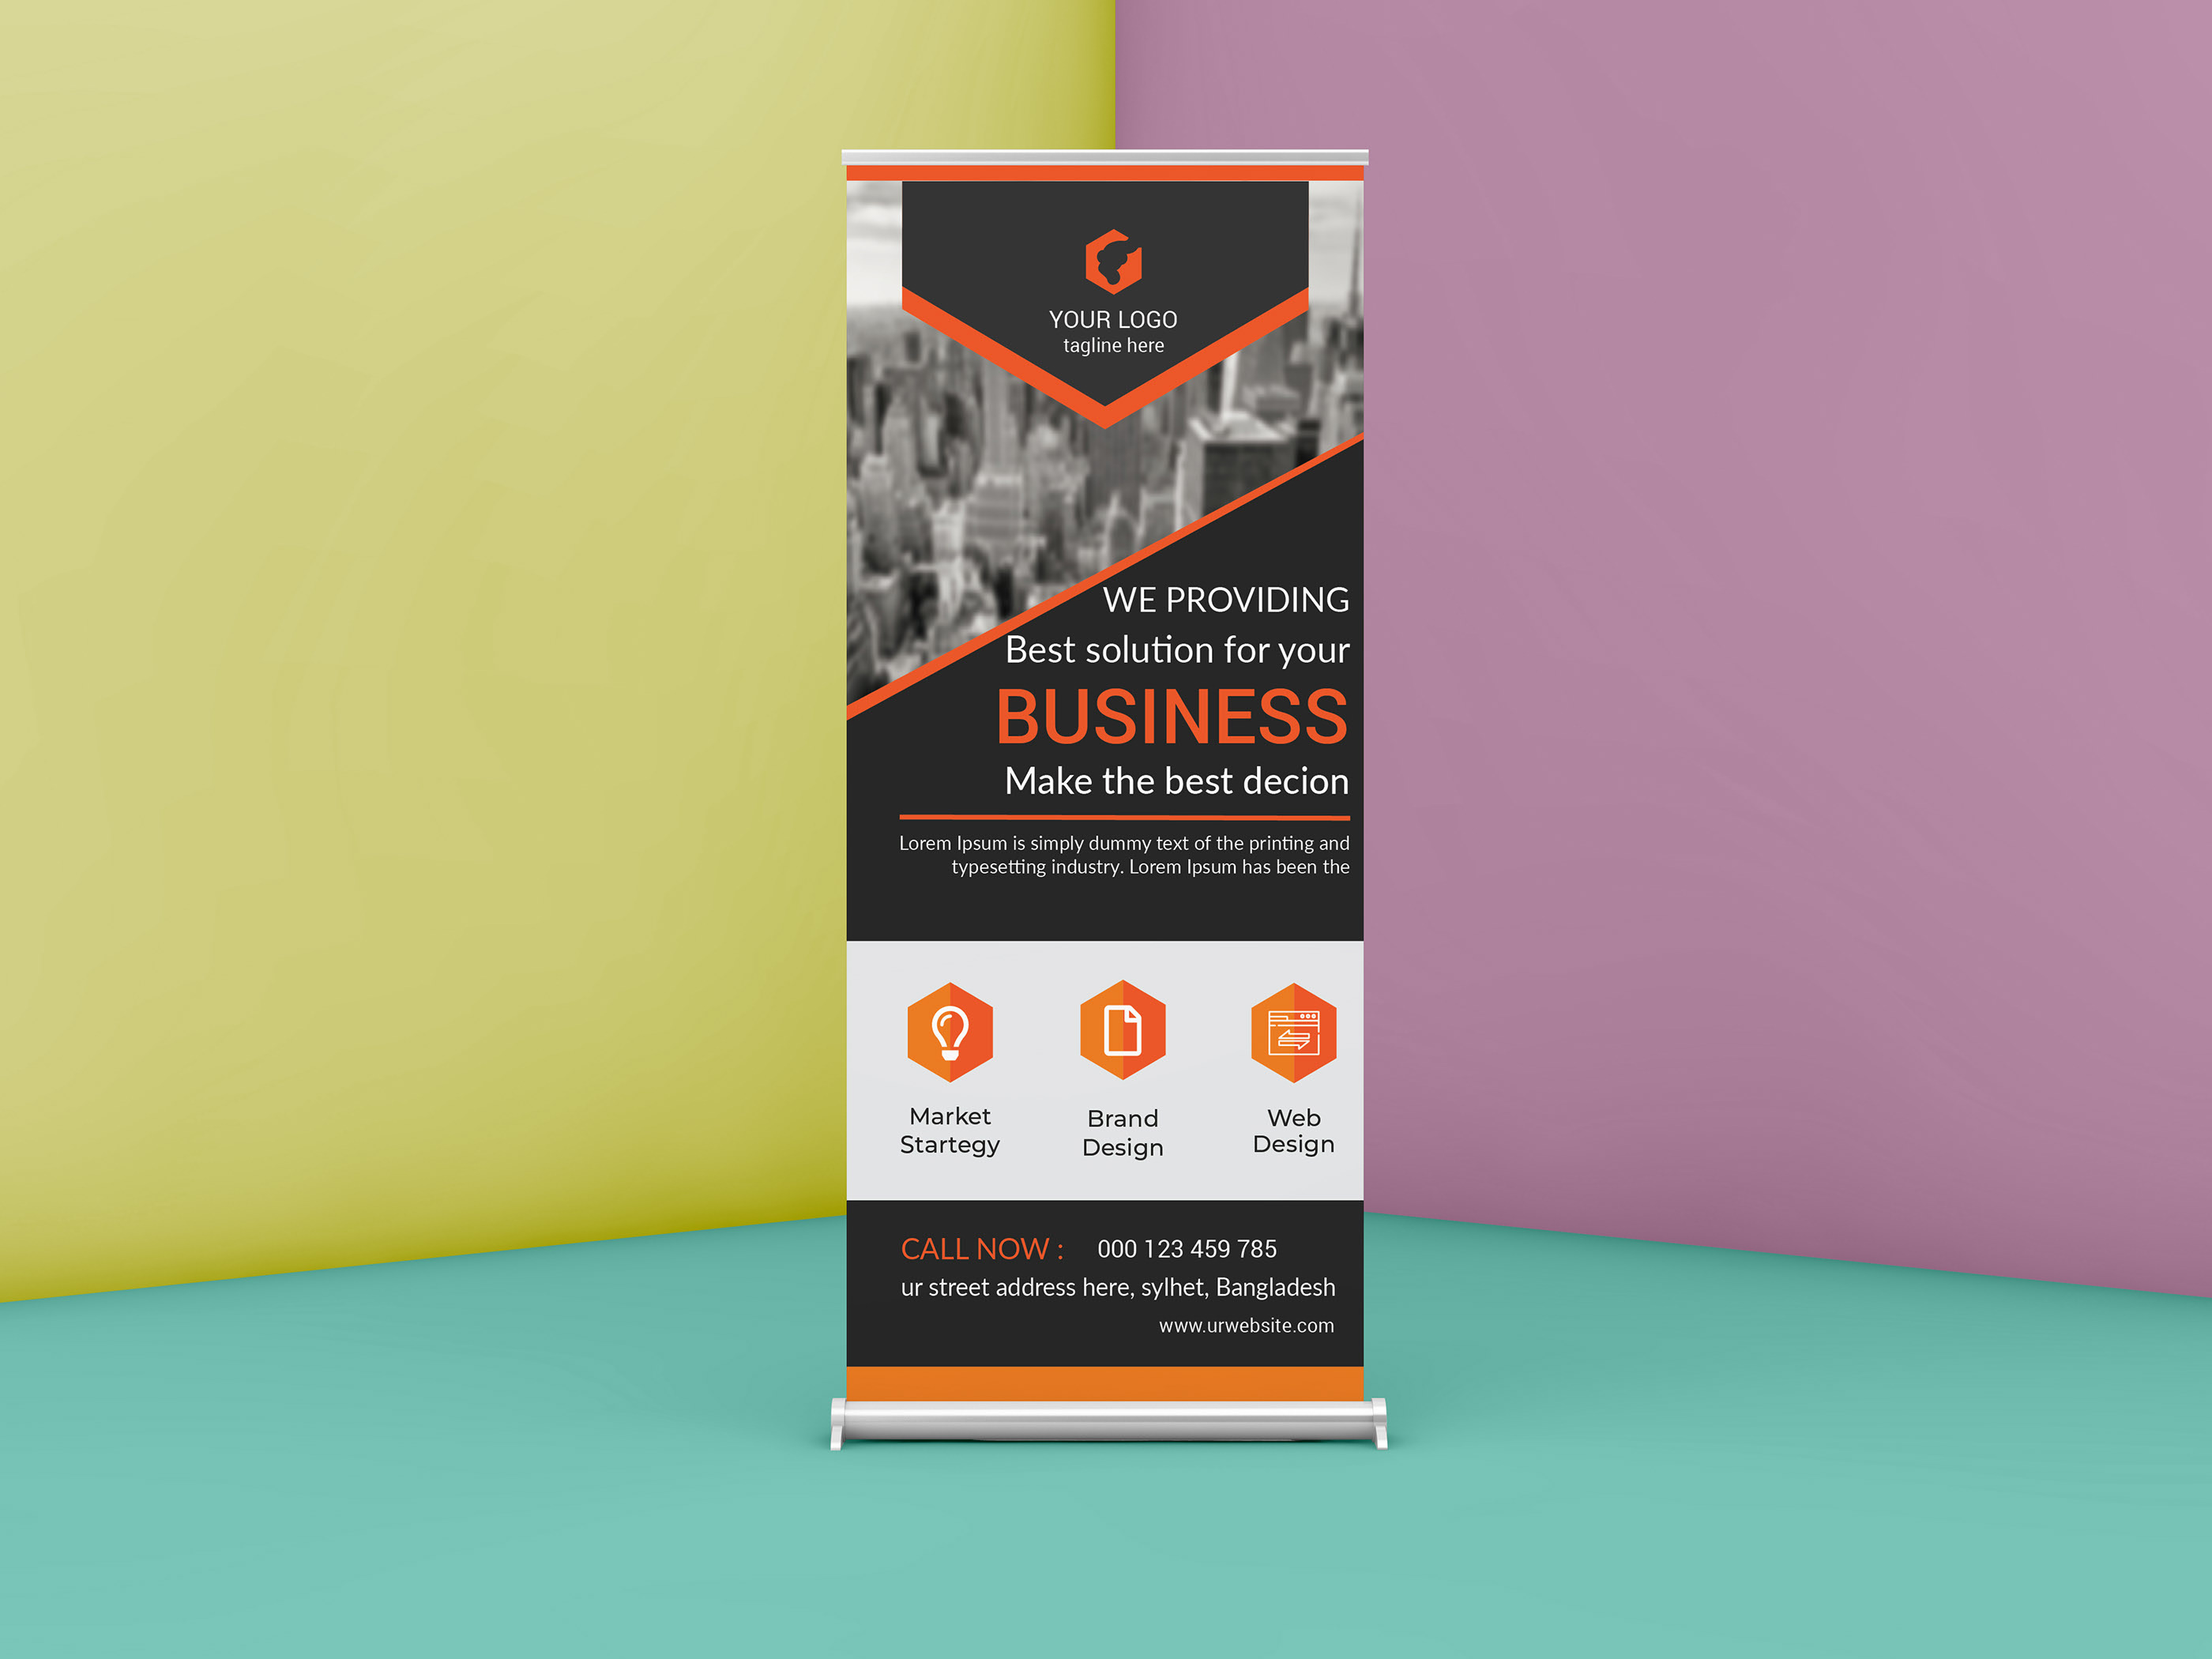 Roll up banner design template free download on Behance